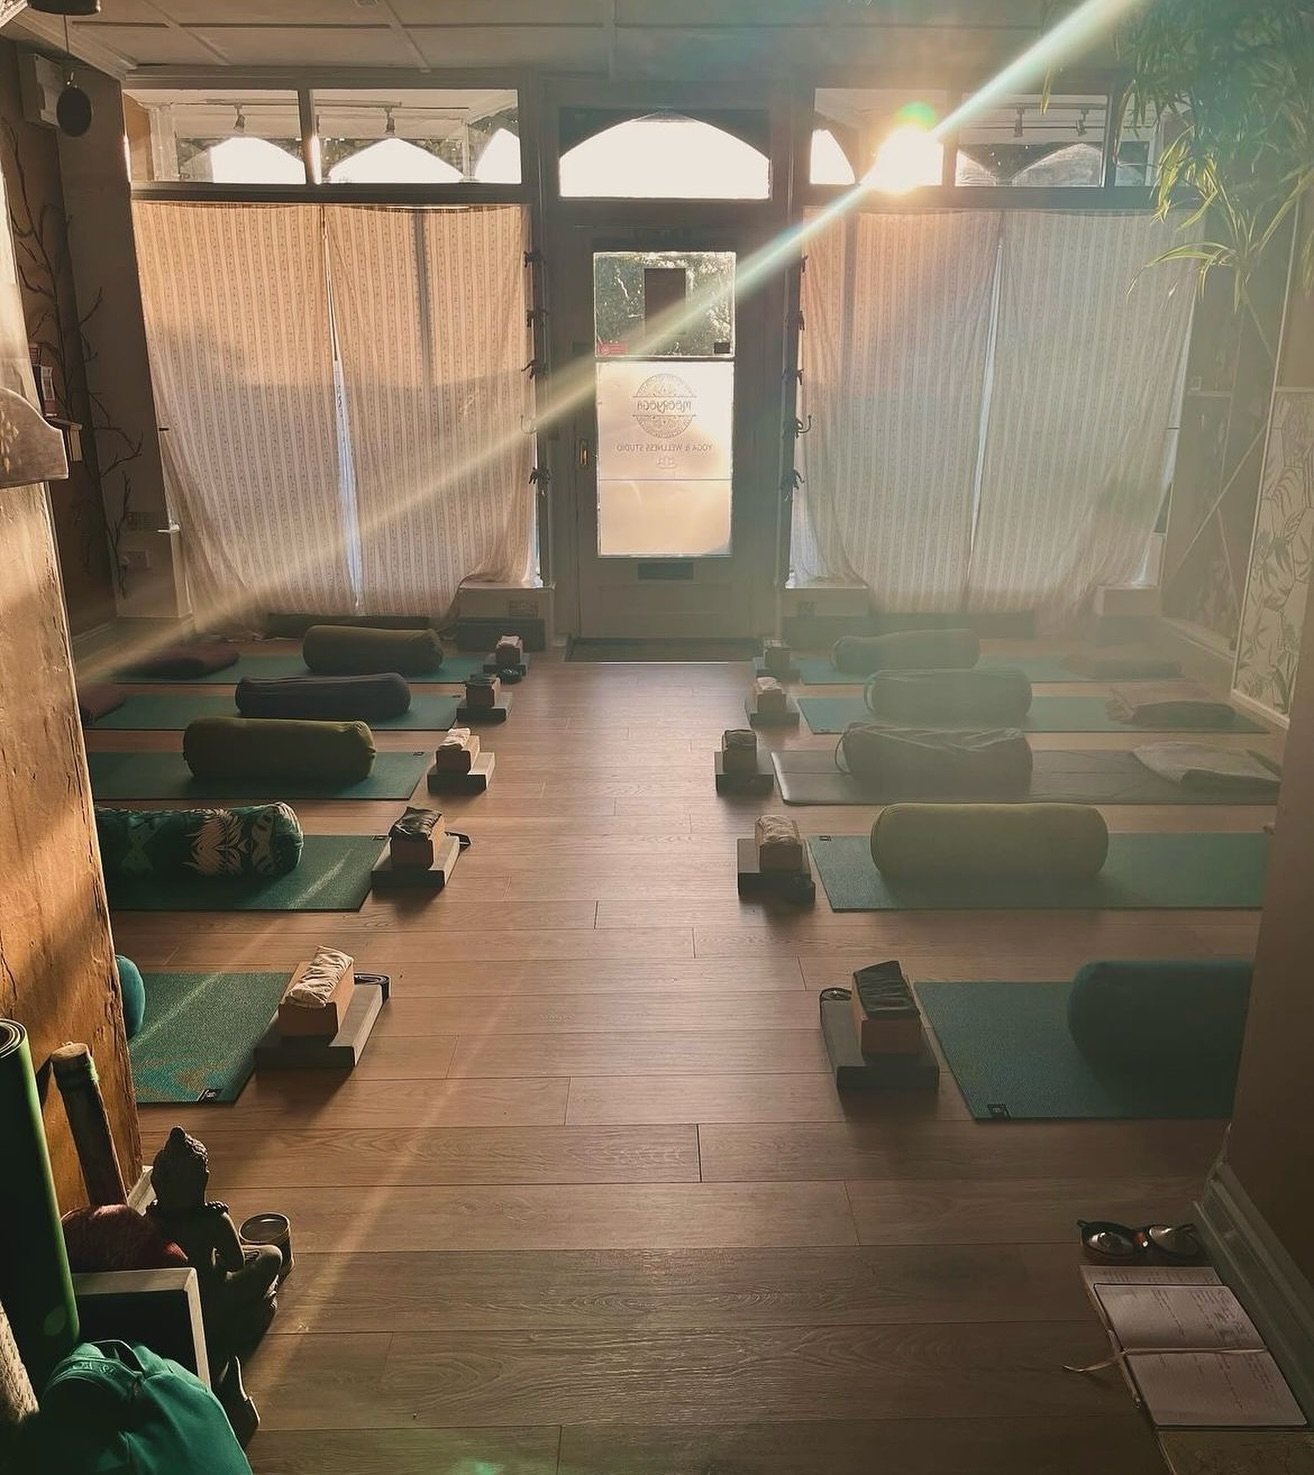 This was the studio we practised in on retreat in North Devon. It&rsquo;s a beautiful studio right in the heart of #Lynton. If you&rsquo;re visiting the area you can do drop in classes. It&rsquo;s a gorgeous welcoming space. 🙏🏼
@mooryogalynton @lon